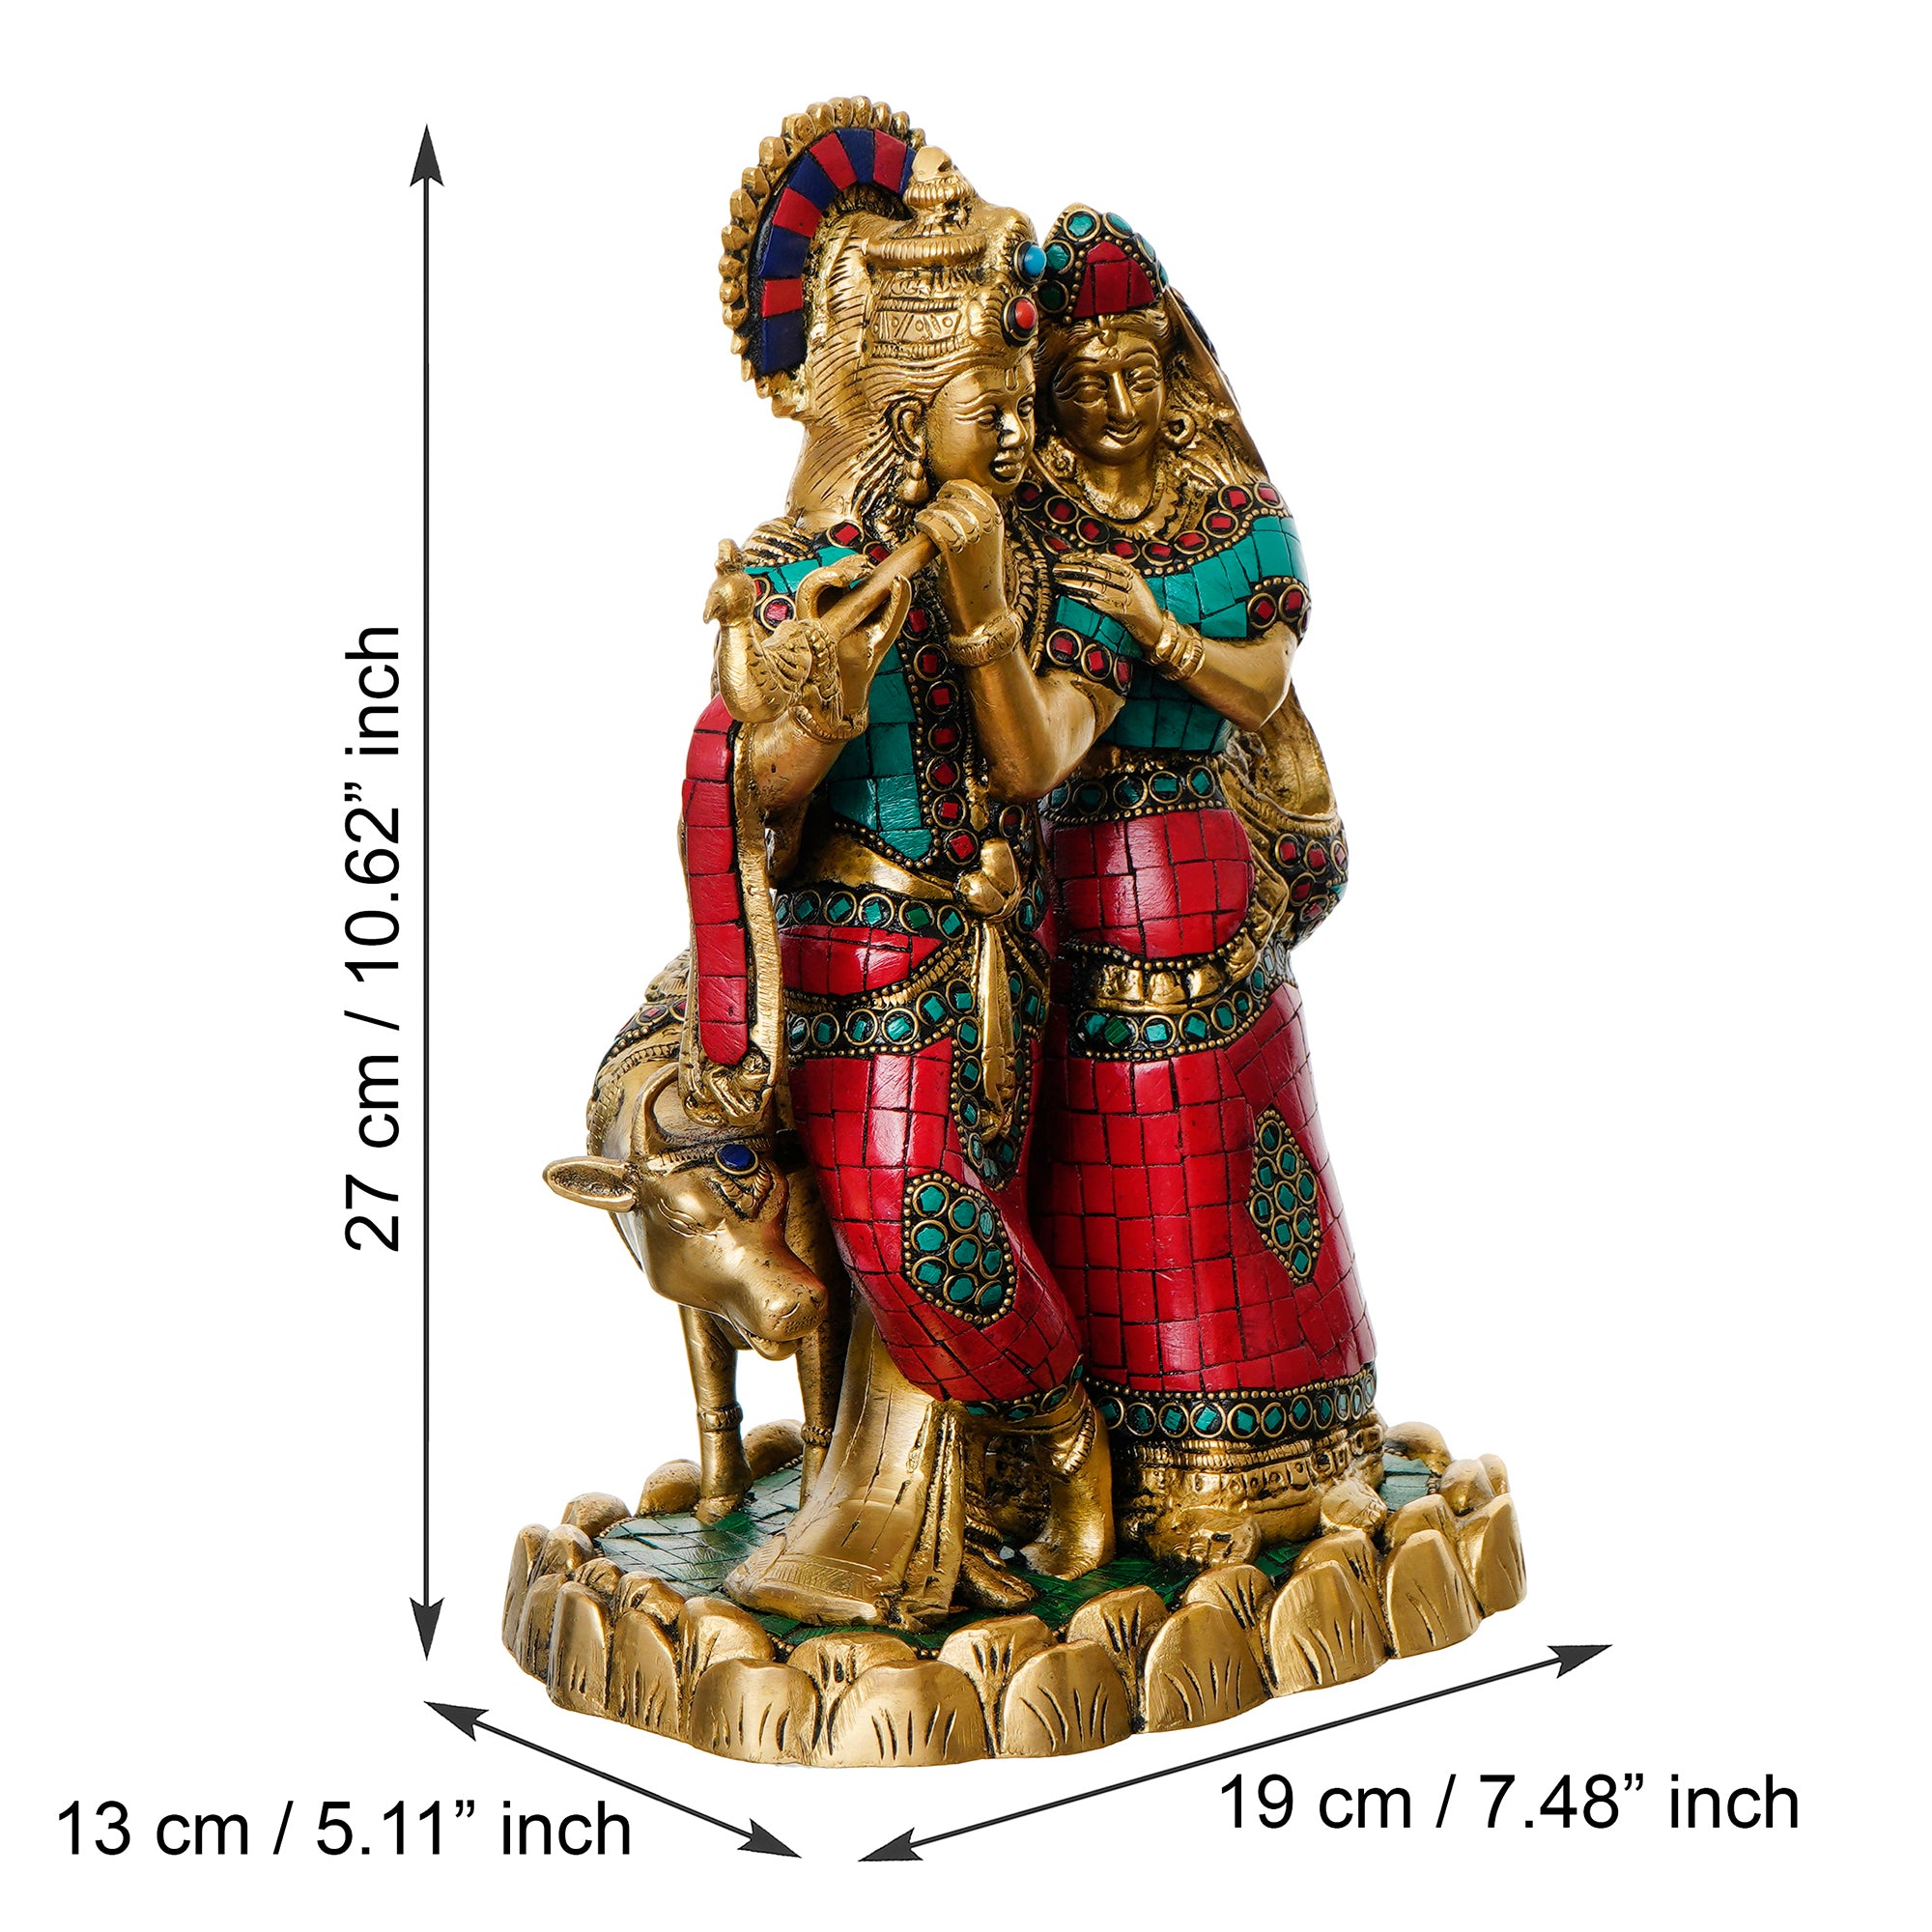 Colorful Stone Work Brass Radha Krishna Statue with Cow Figurine (Gold, Green, Red) 3